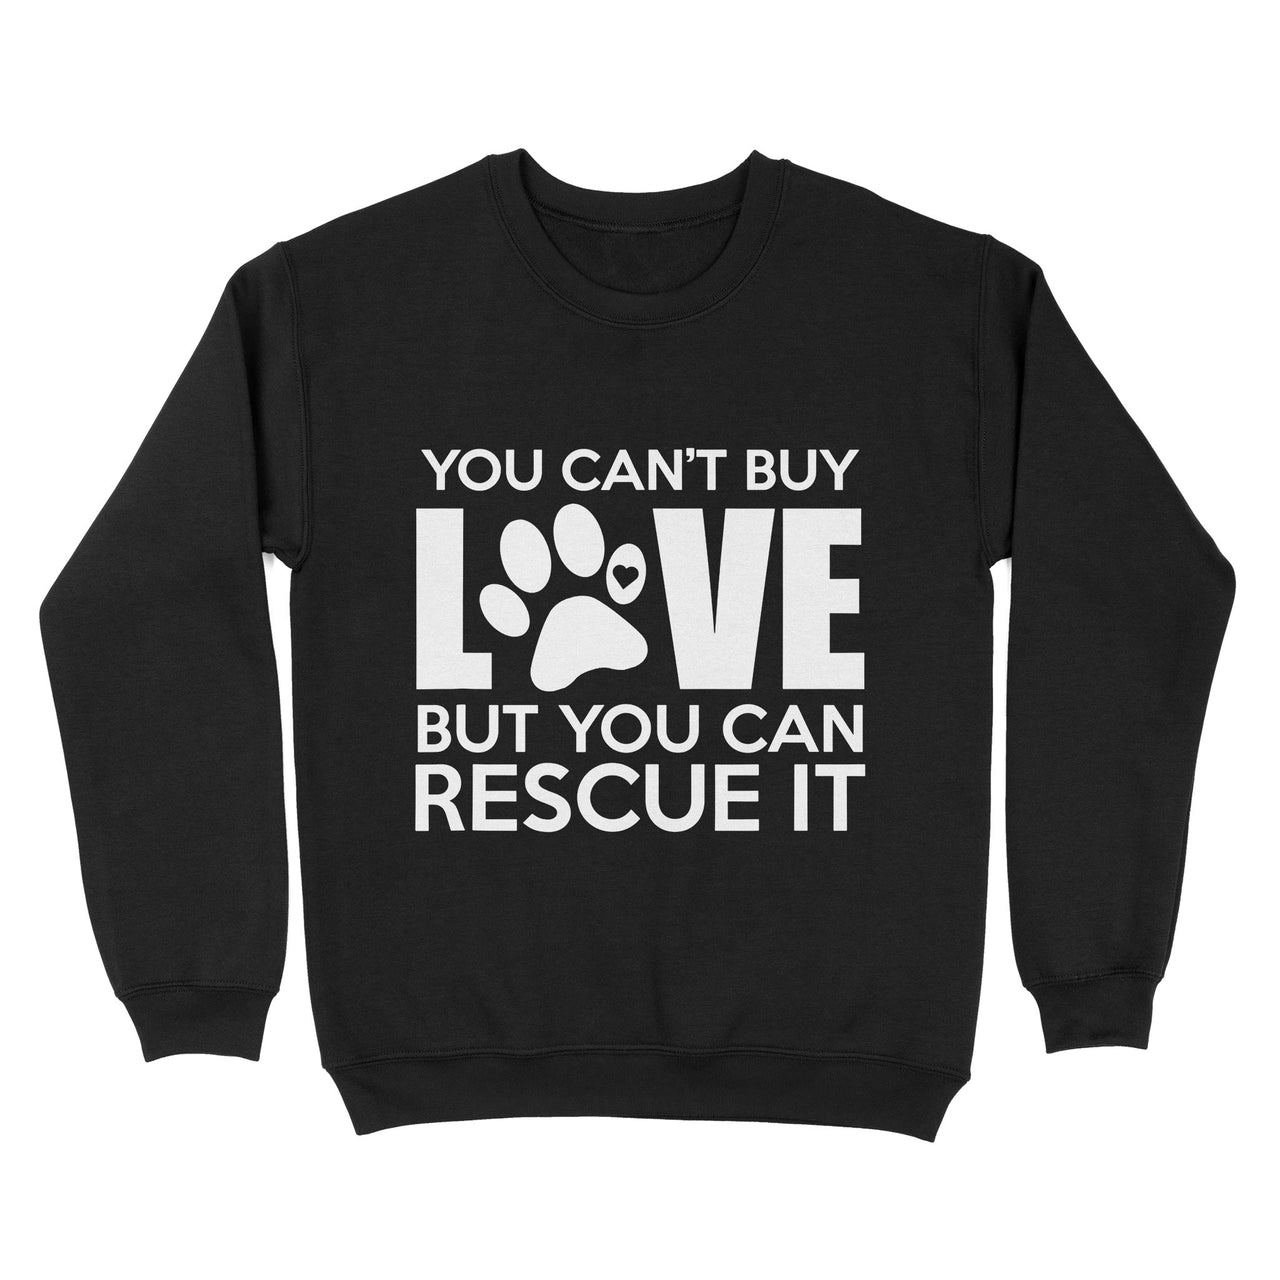 Gift For Dog Lover - You Can't Buy Love But You Can Rescue It - Standard Crew Neck Sweatshirt